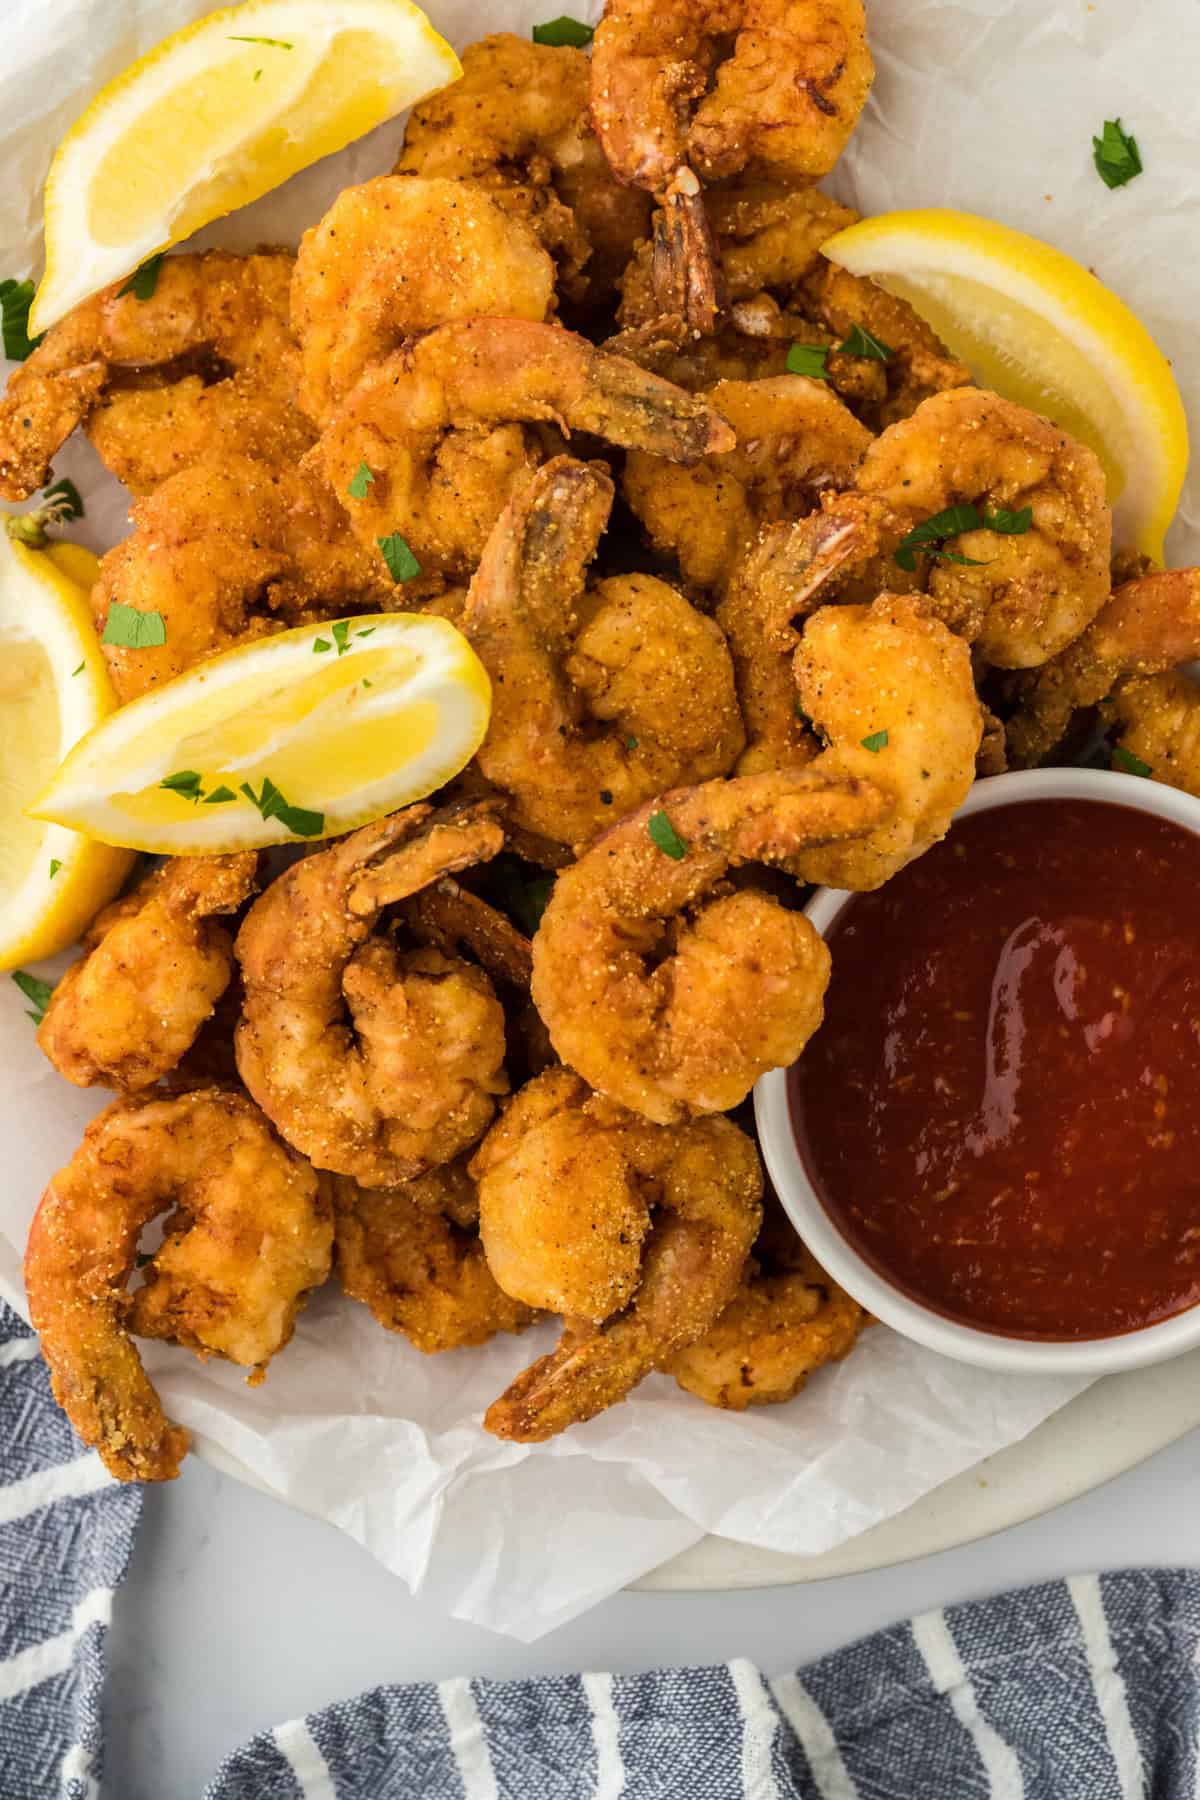 deep fried shrimp on a parchment paper with lemon wedges and cocktail sauce ready to serve